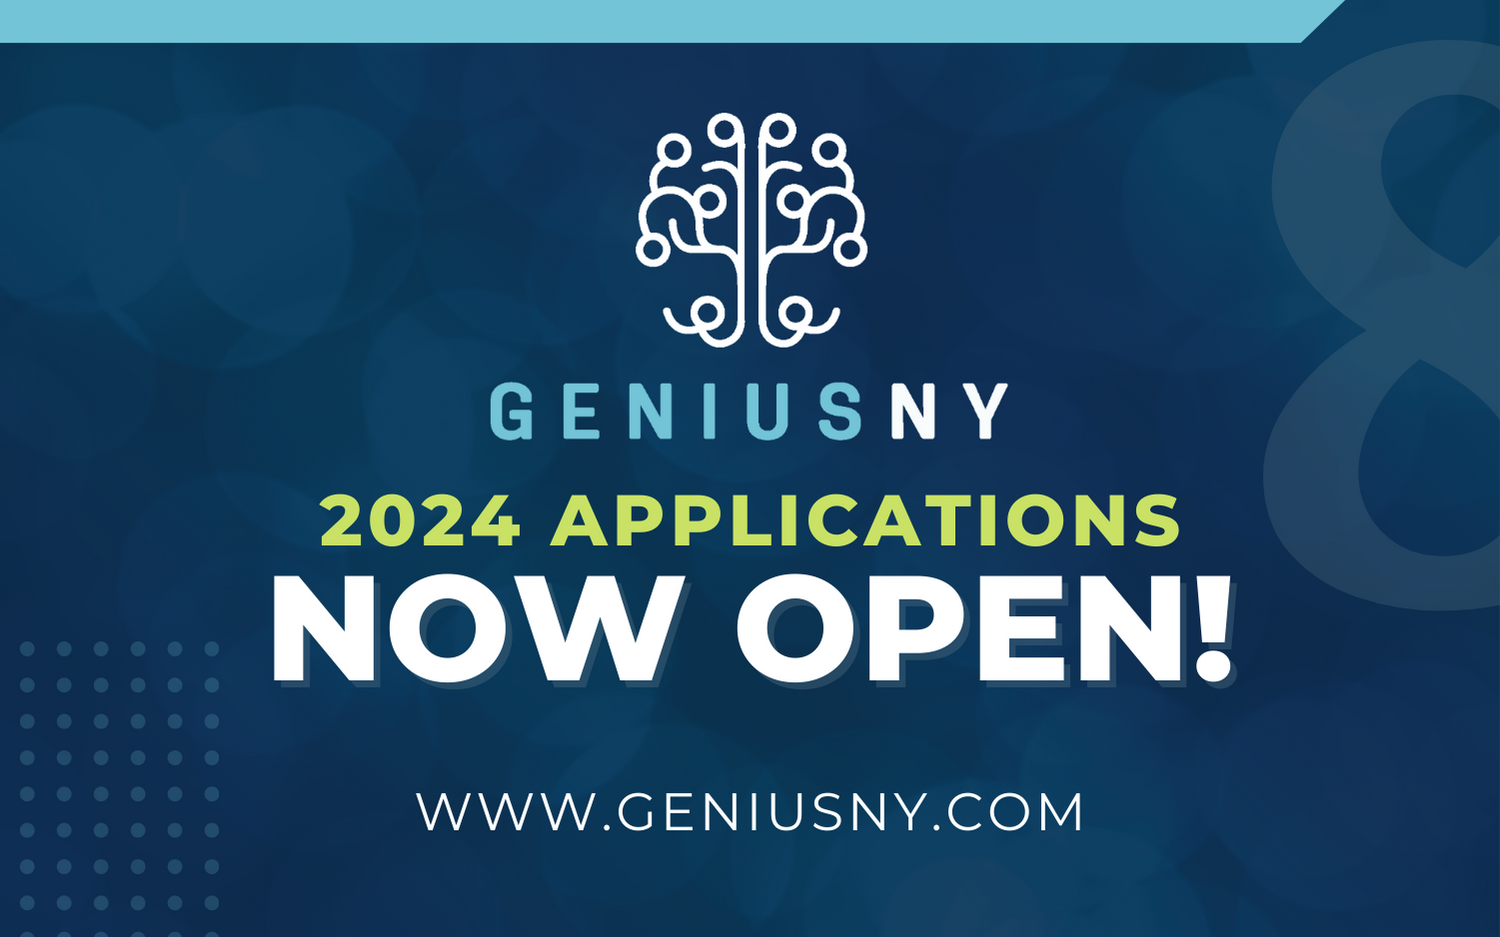 Empire State Development Announces Application Window Open for Round Eight of GENIUS NY Business Accelerator